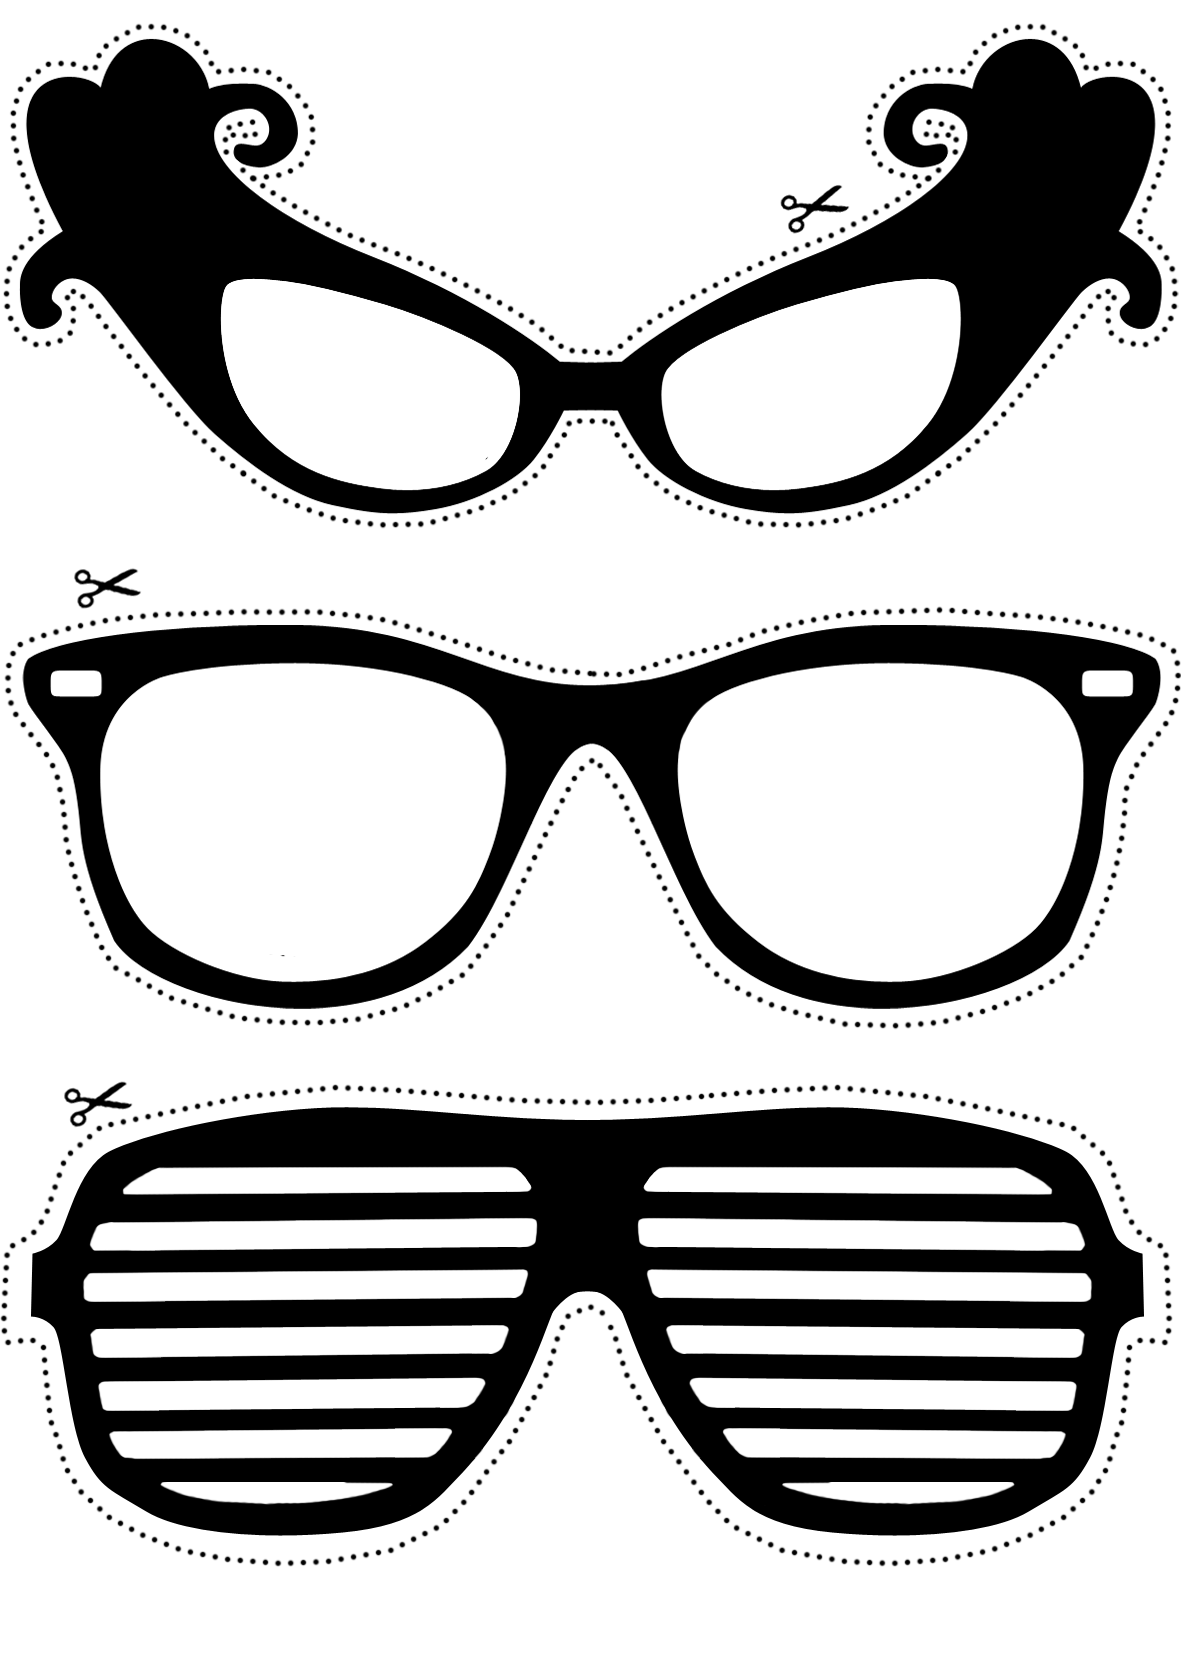 Goggles clipart librarian. Photo booth props black